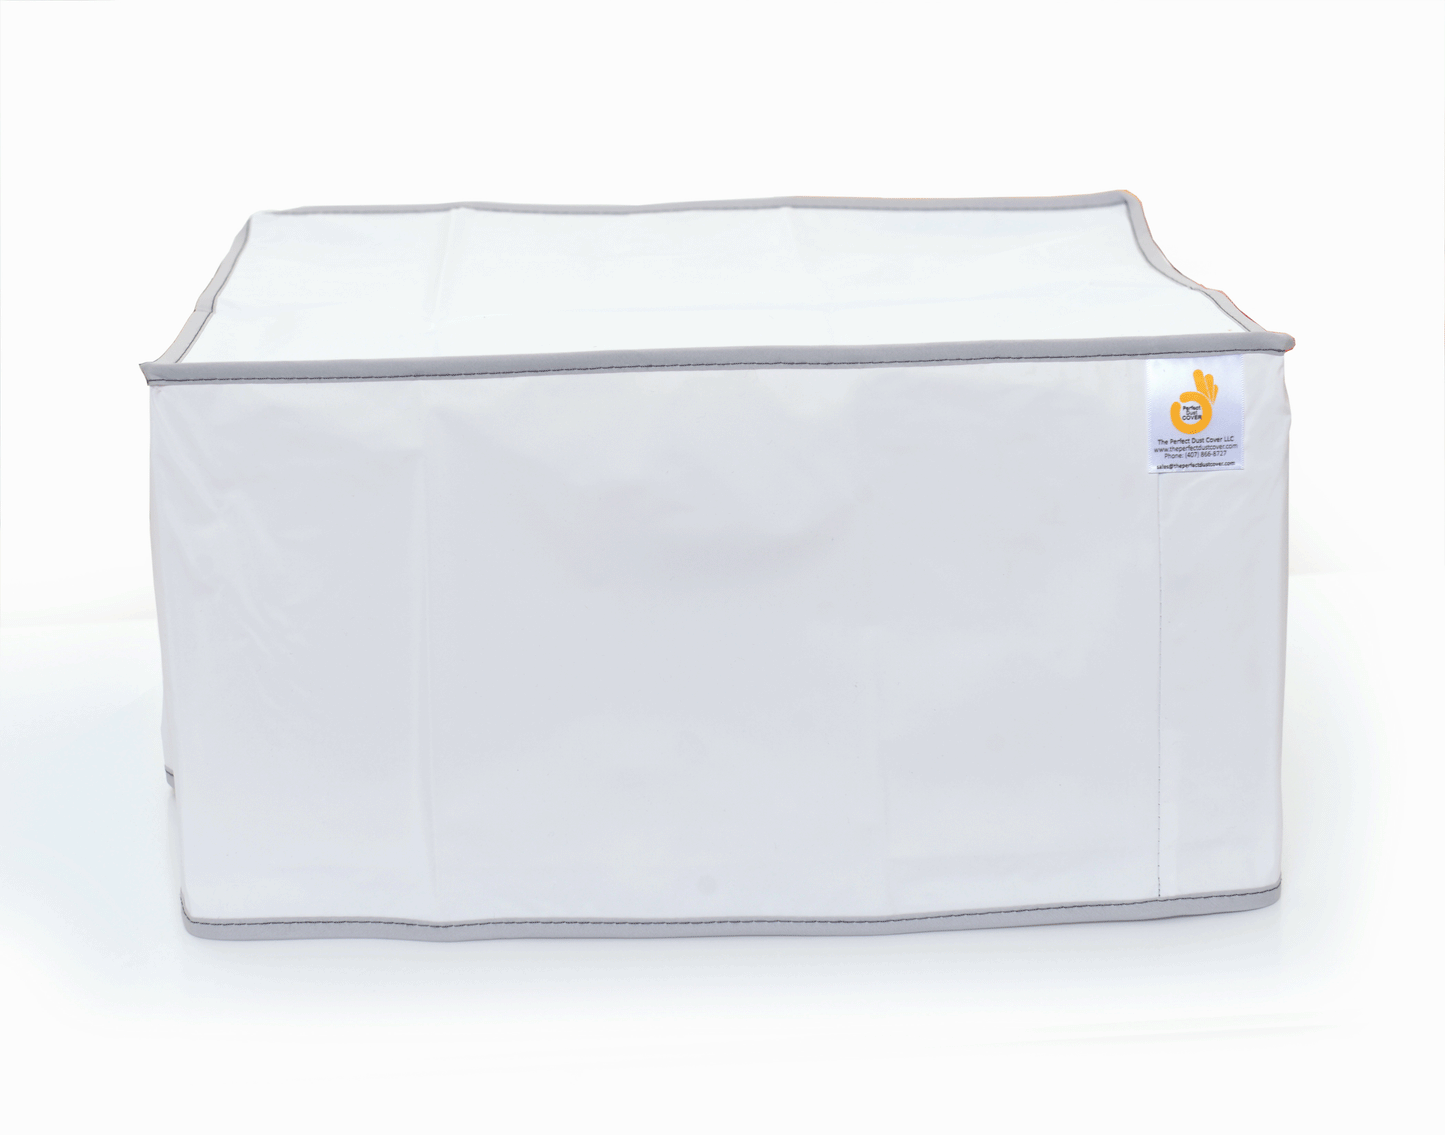 The Perfect Dust Cover, White Nylon Cover Compatible with HP LaserJet Pro 400 M451dw Color Laser Printer, Anti-Static and Waterproof Dust Cover by The Perfect Dust Cover LLC